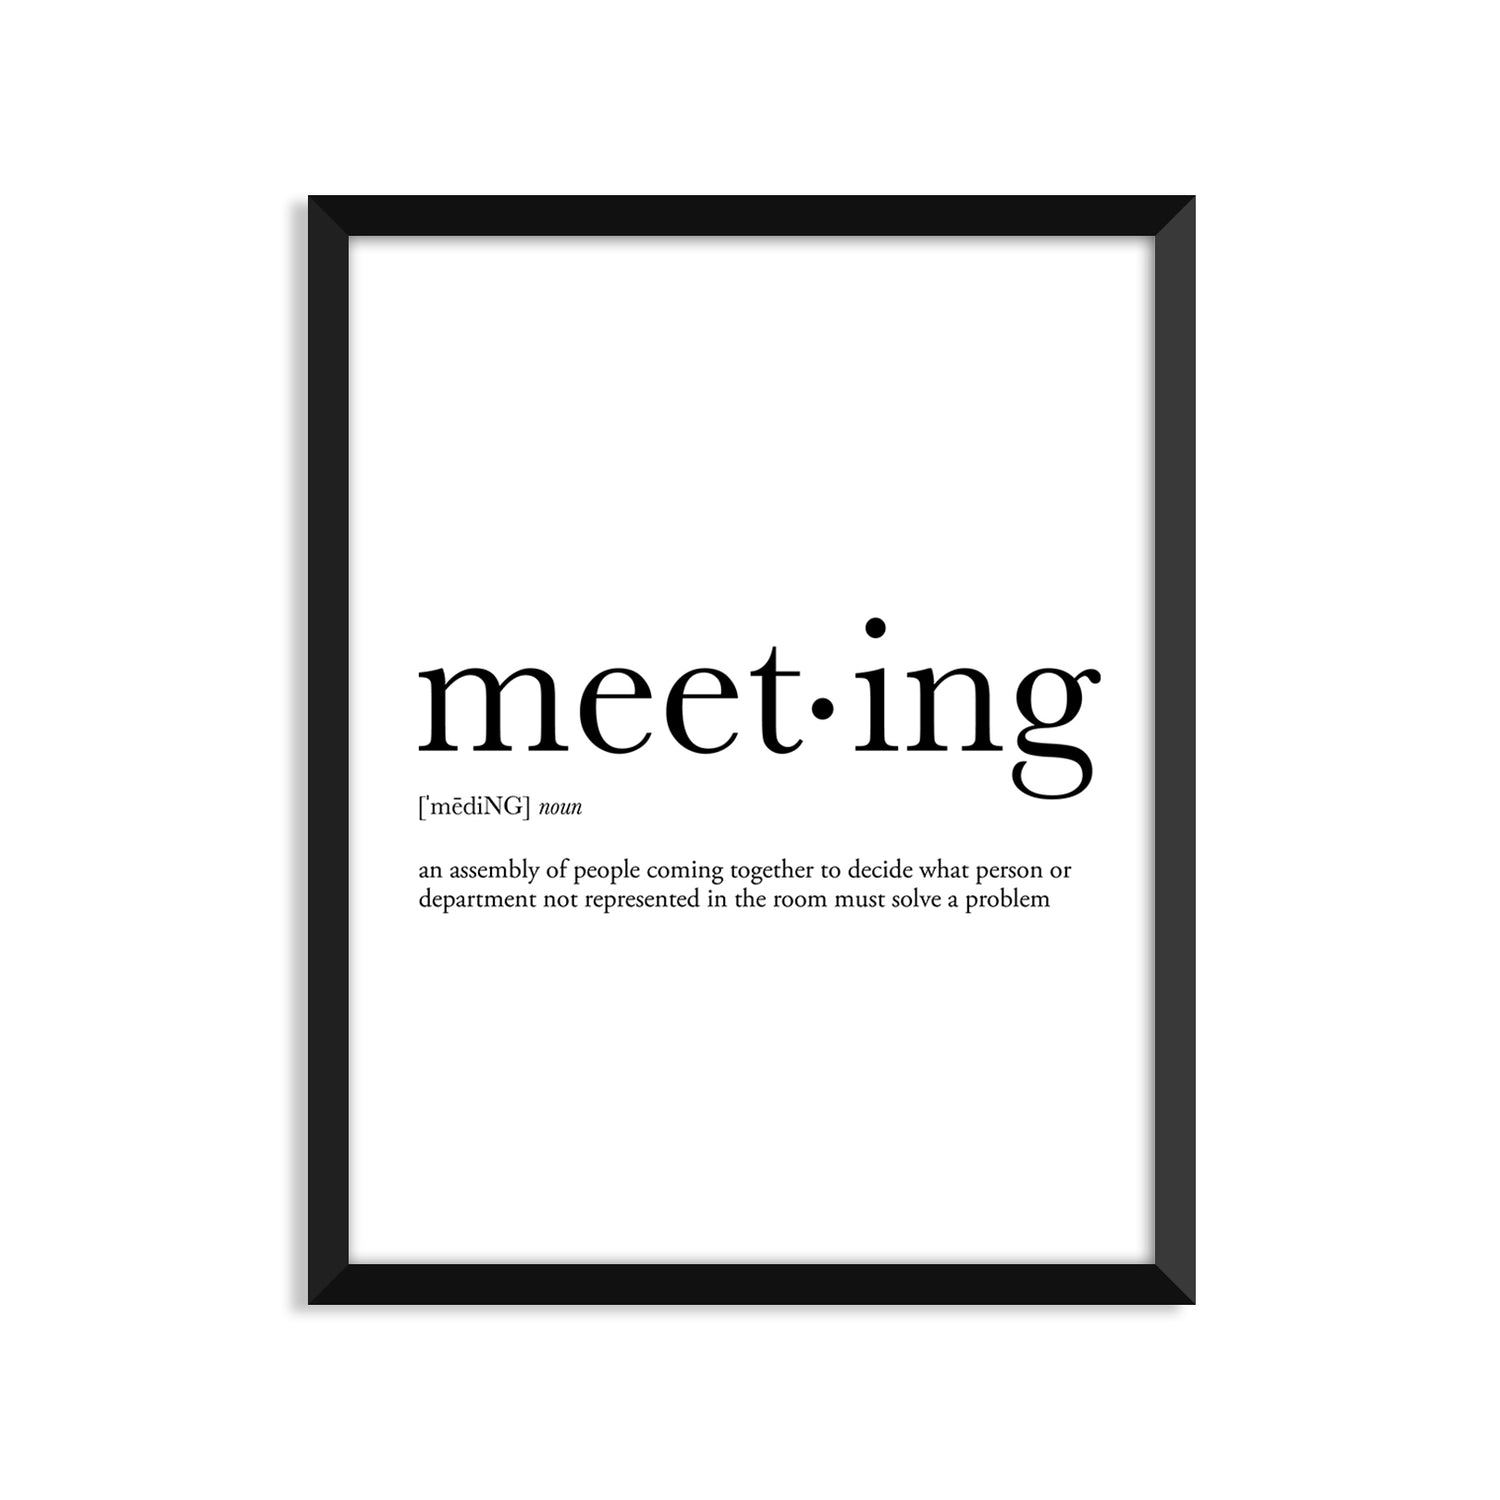 Meeting Definition - Unframed Art Print Or Greeting Card